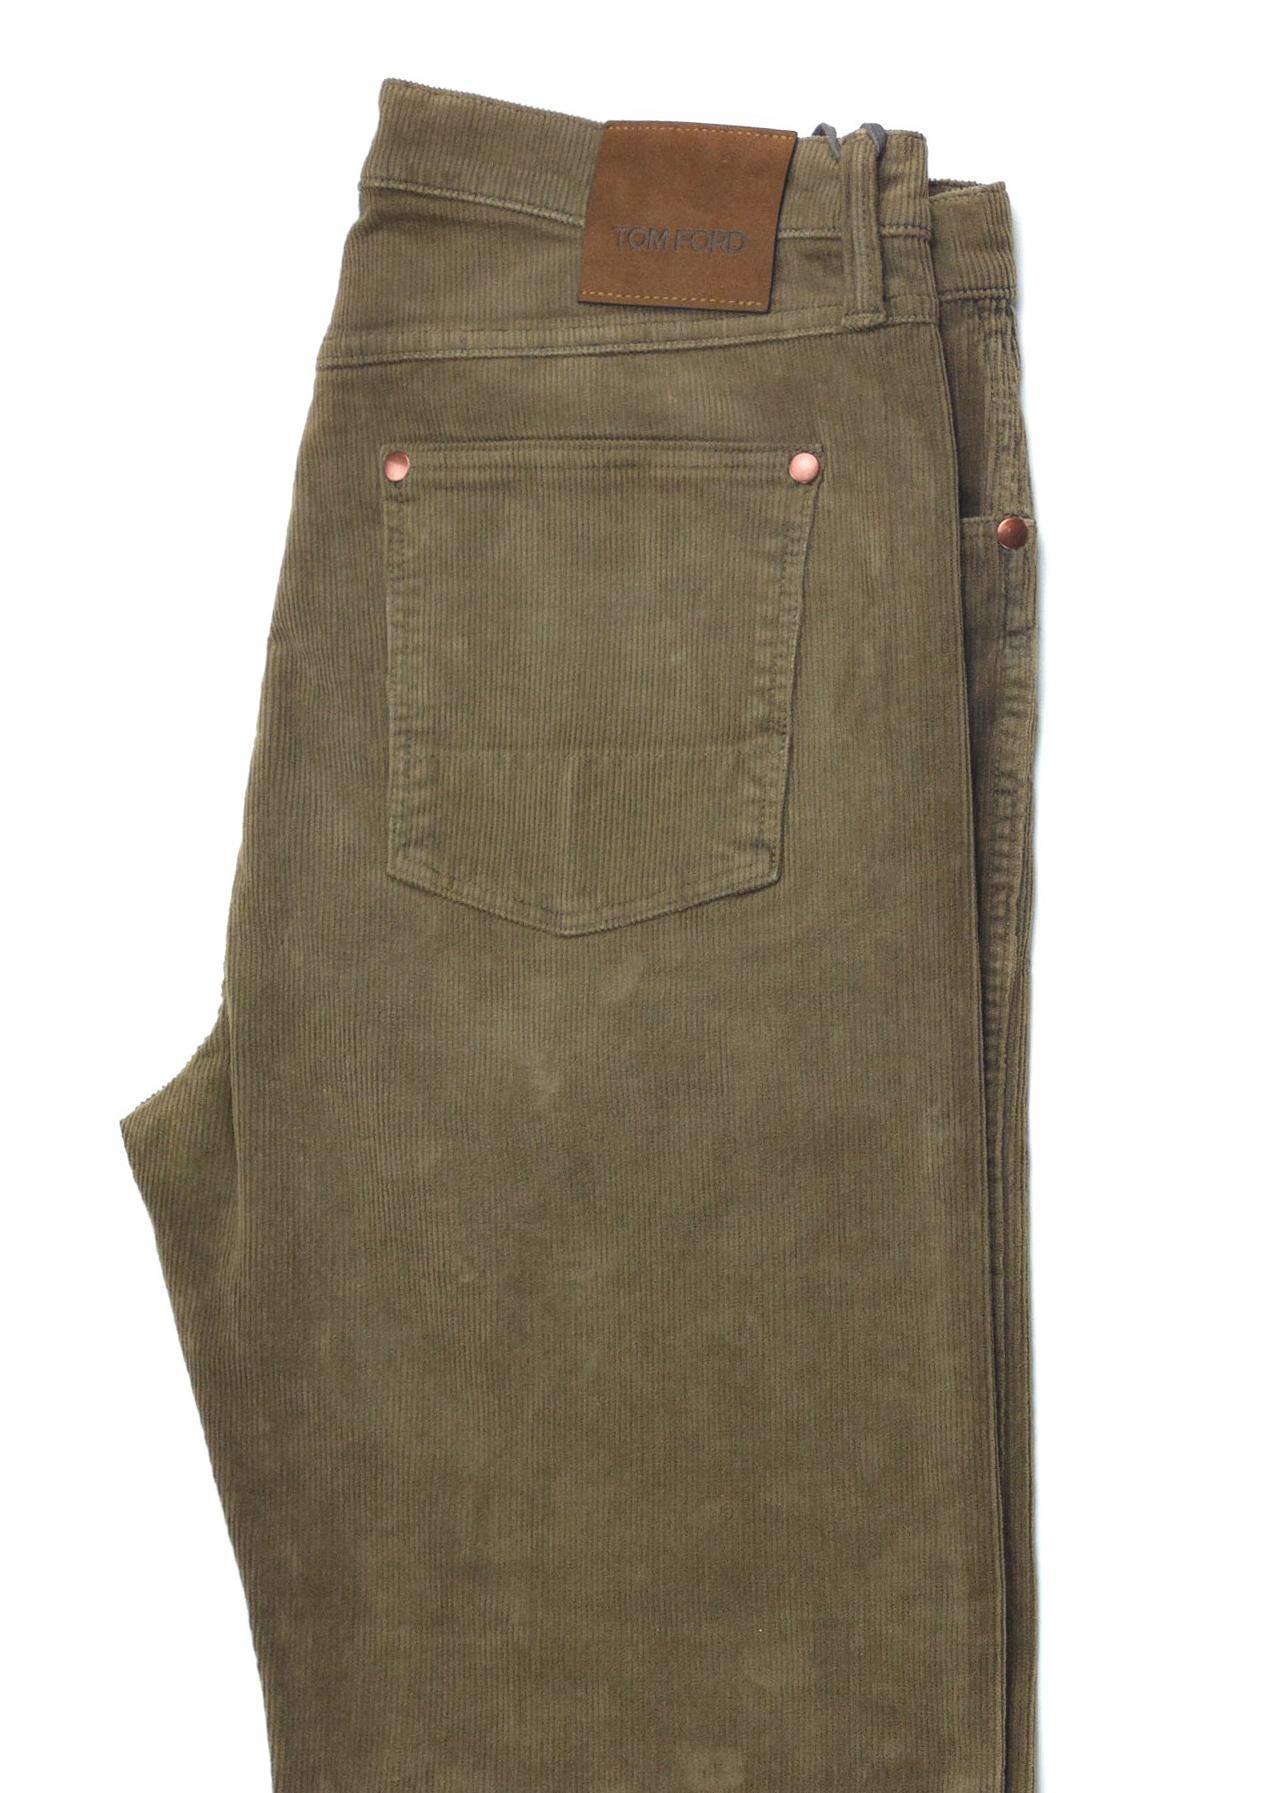 Tom Ford Loose Fit Corduroy pants are the ideal pair of pants for this season. These pants feature a earthy brown color, corduroy construction, and relaxed fit silhouette. You can pair these trousers with a crisp white t-shirt for the perfect semi